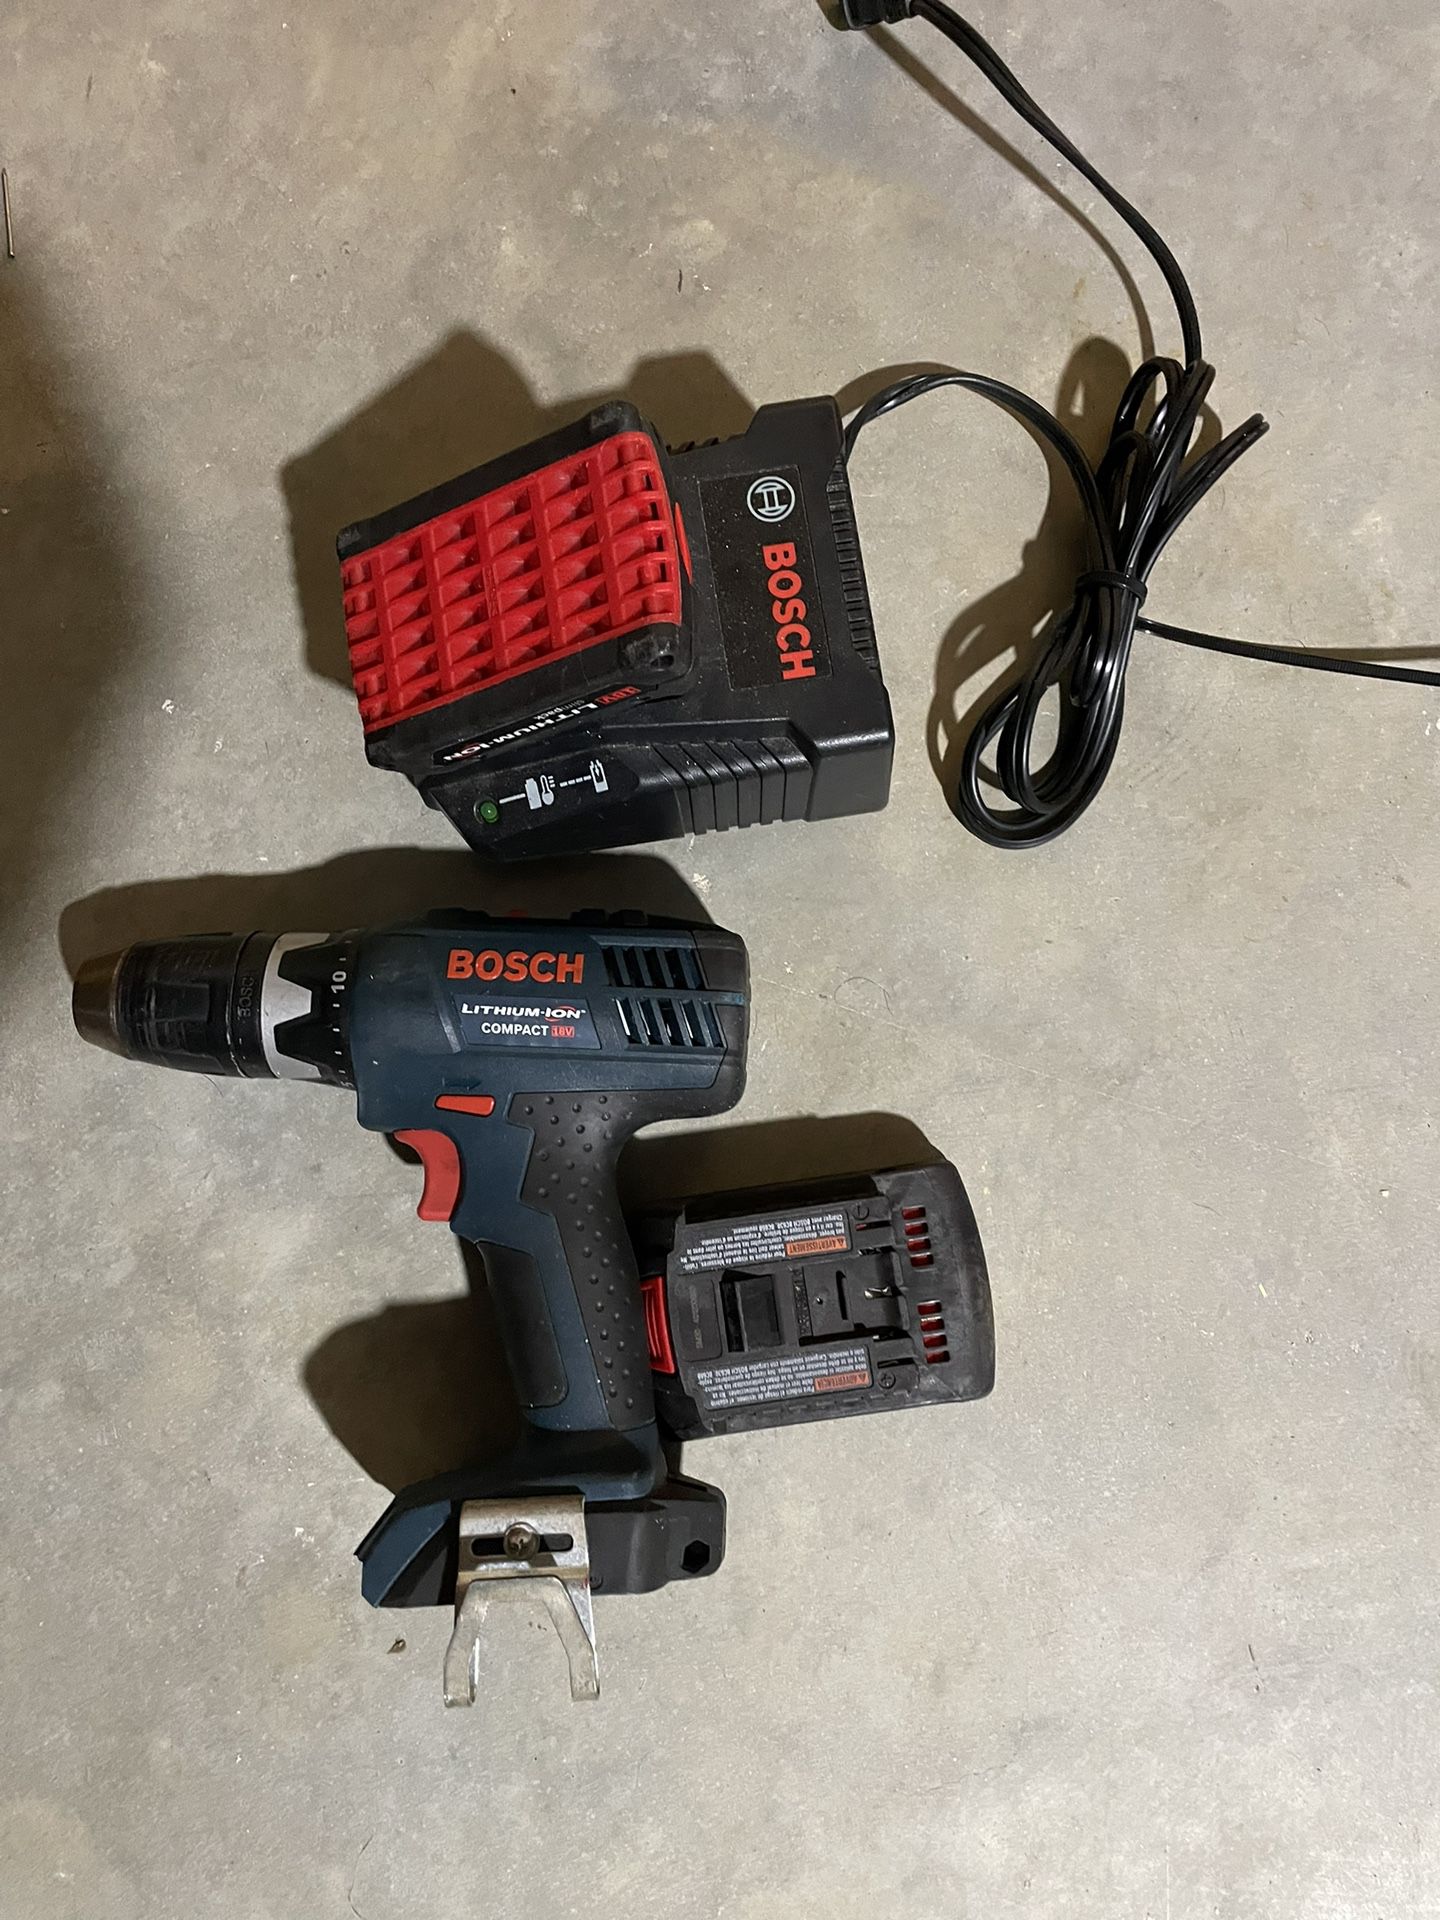 Drill With Extra battery And Charger